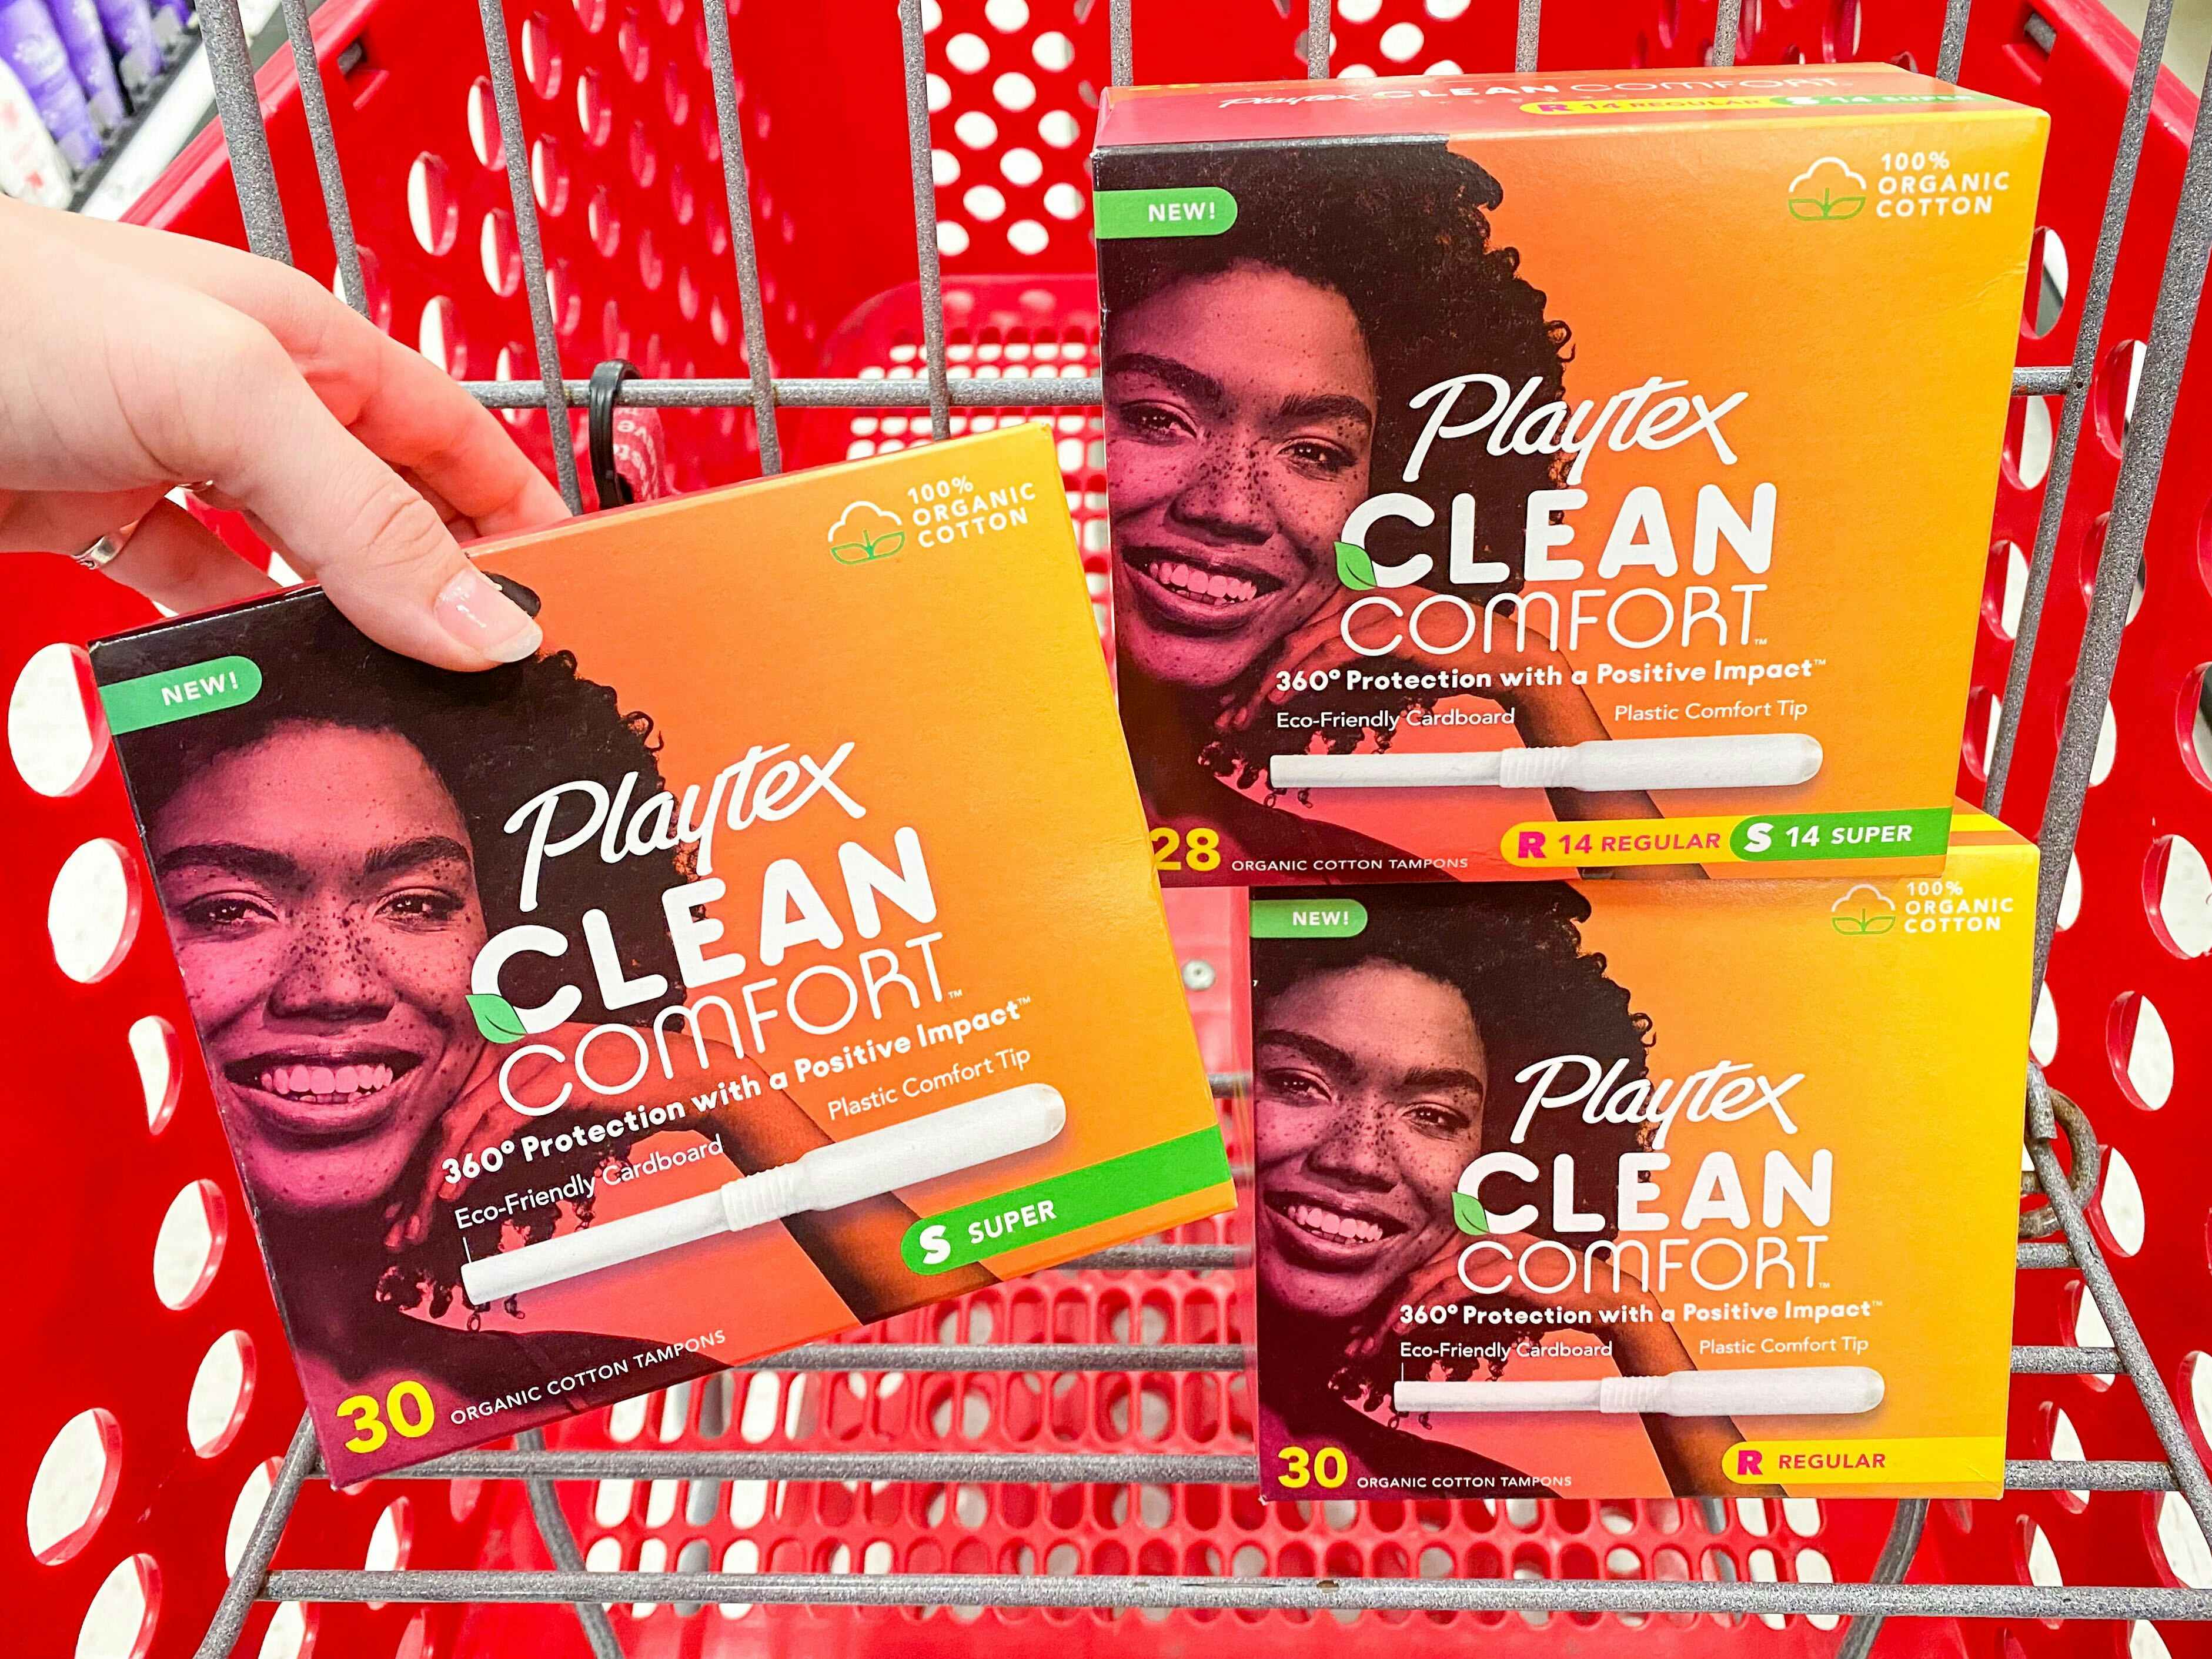 Hand holding up 1 box of Playtex tampons in front of a Target shopping cart that has two other boxes of Playtex tampons in it